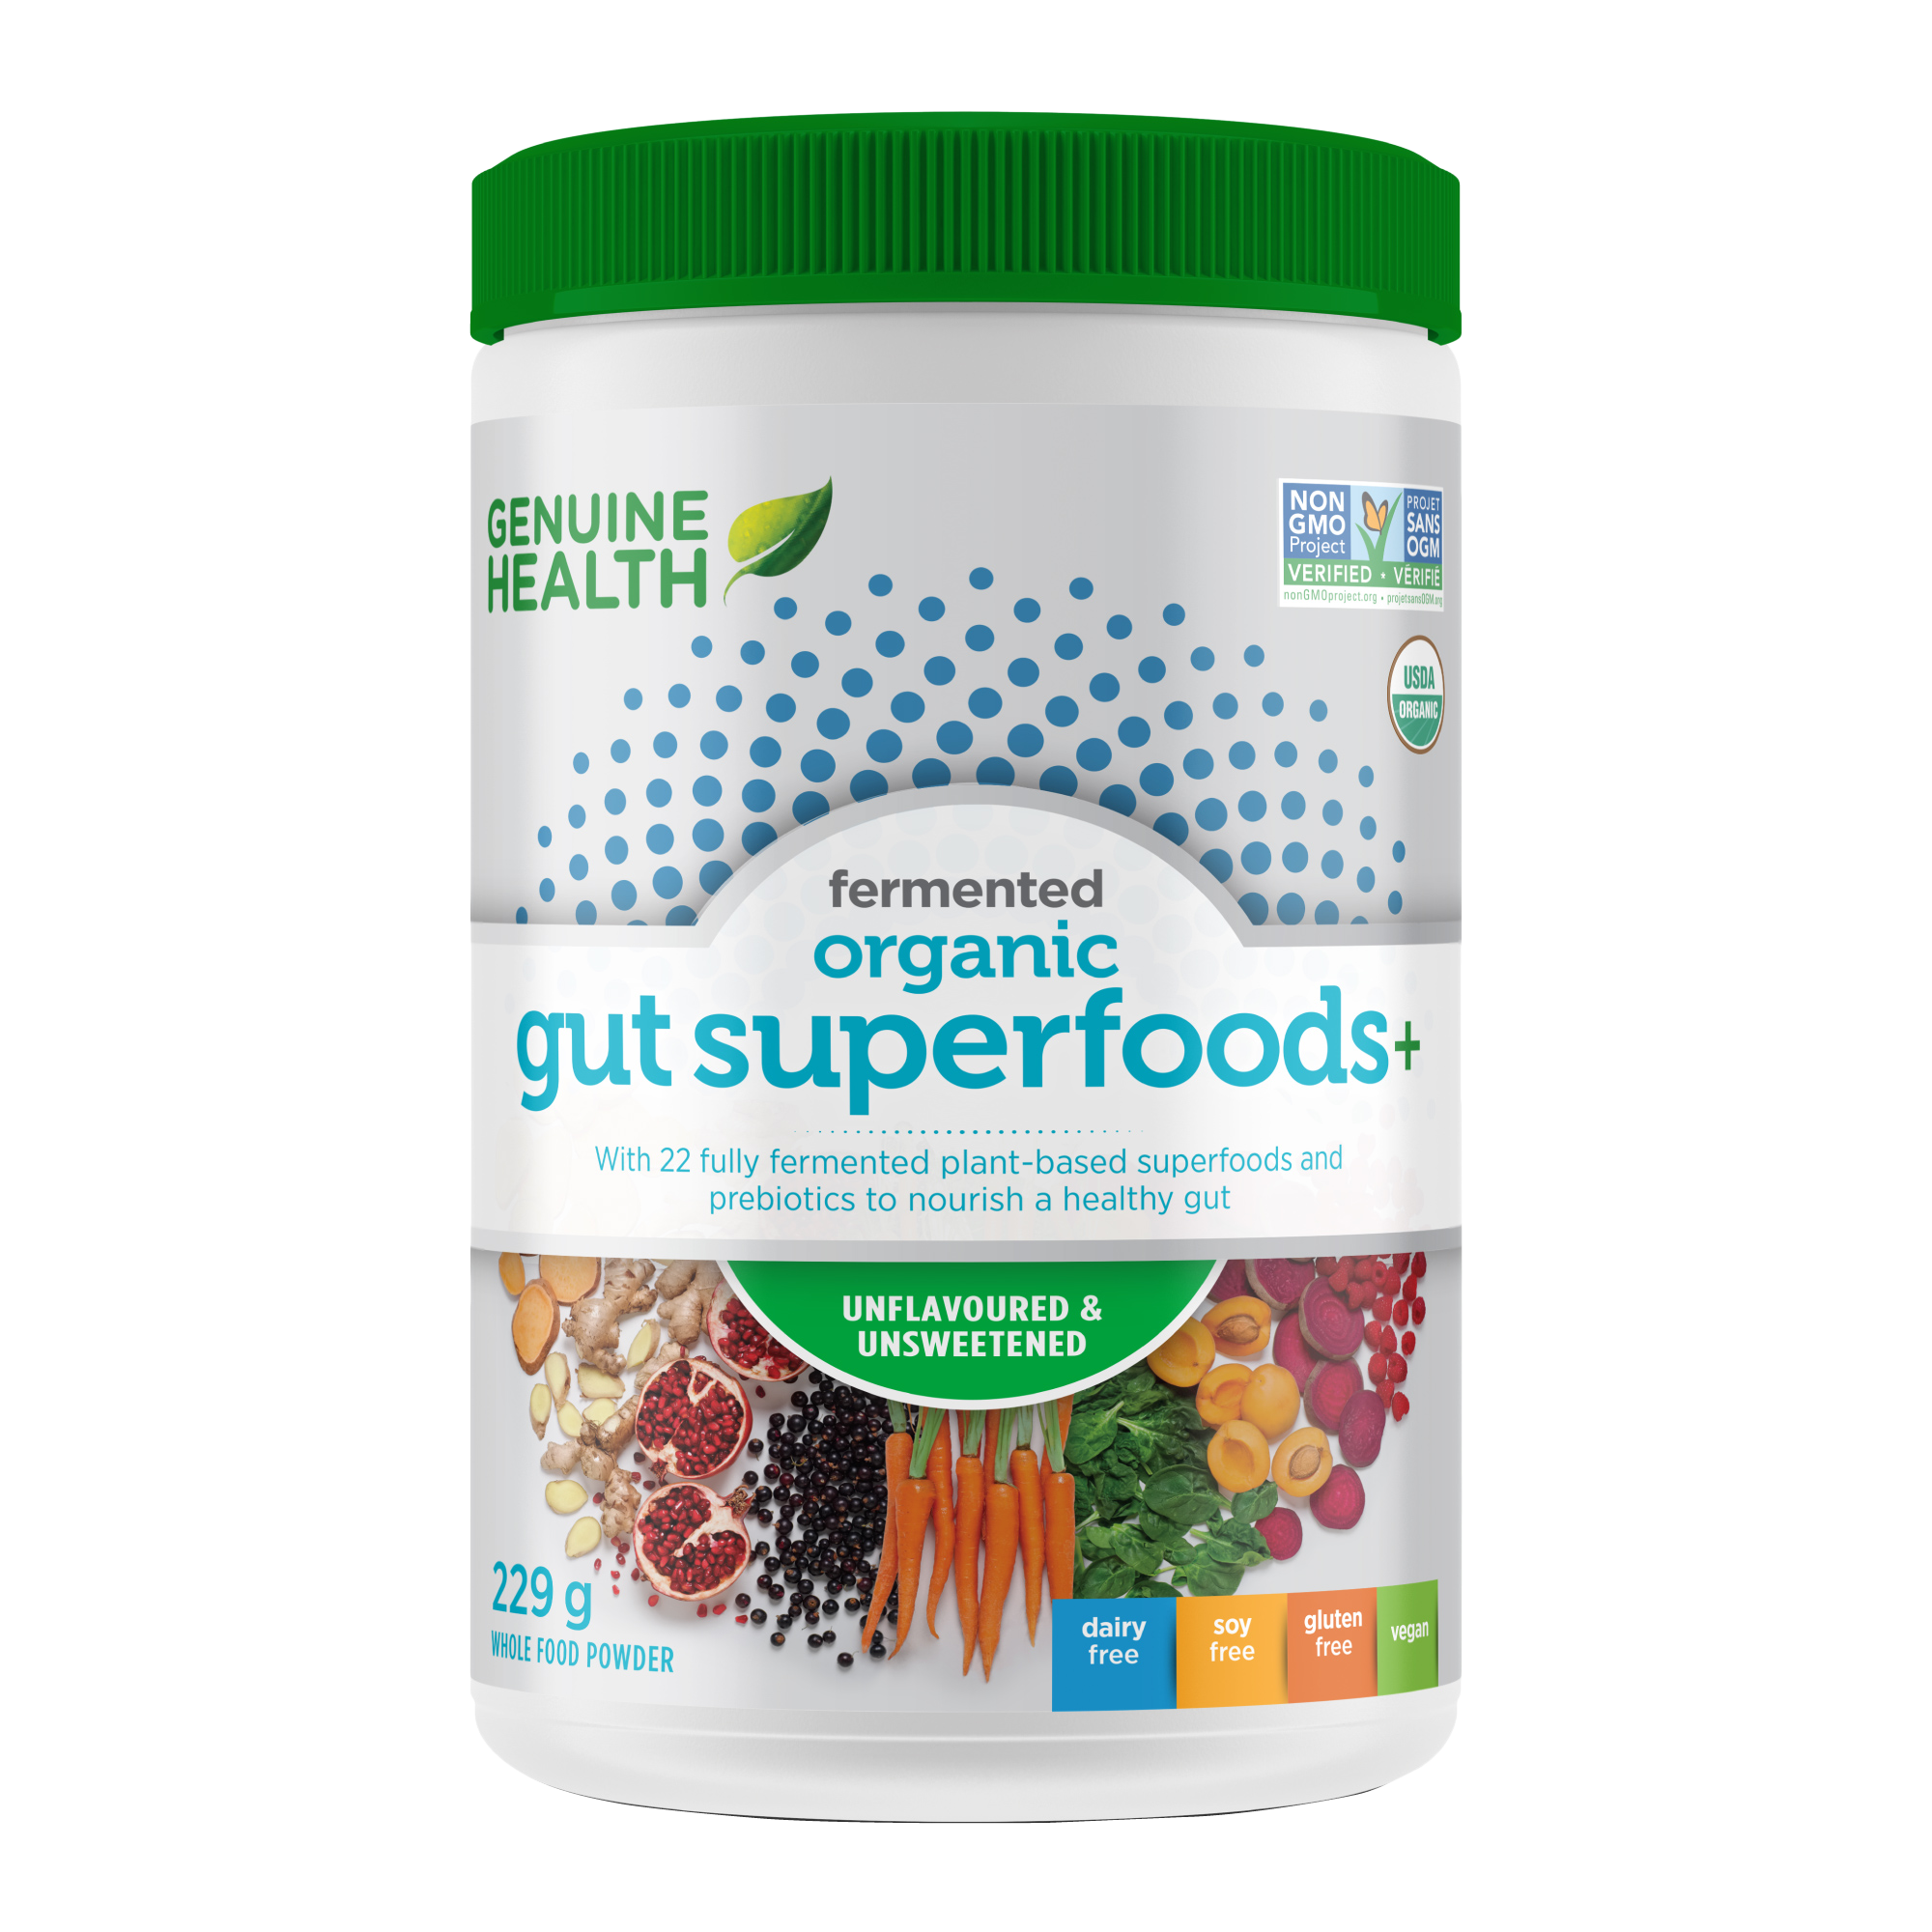 Genuine Health fermented organic gut superfoods unflavoured (229 g)